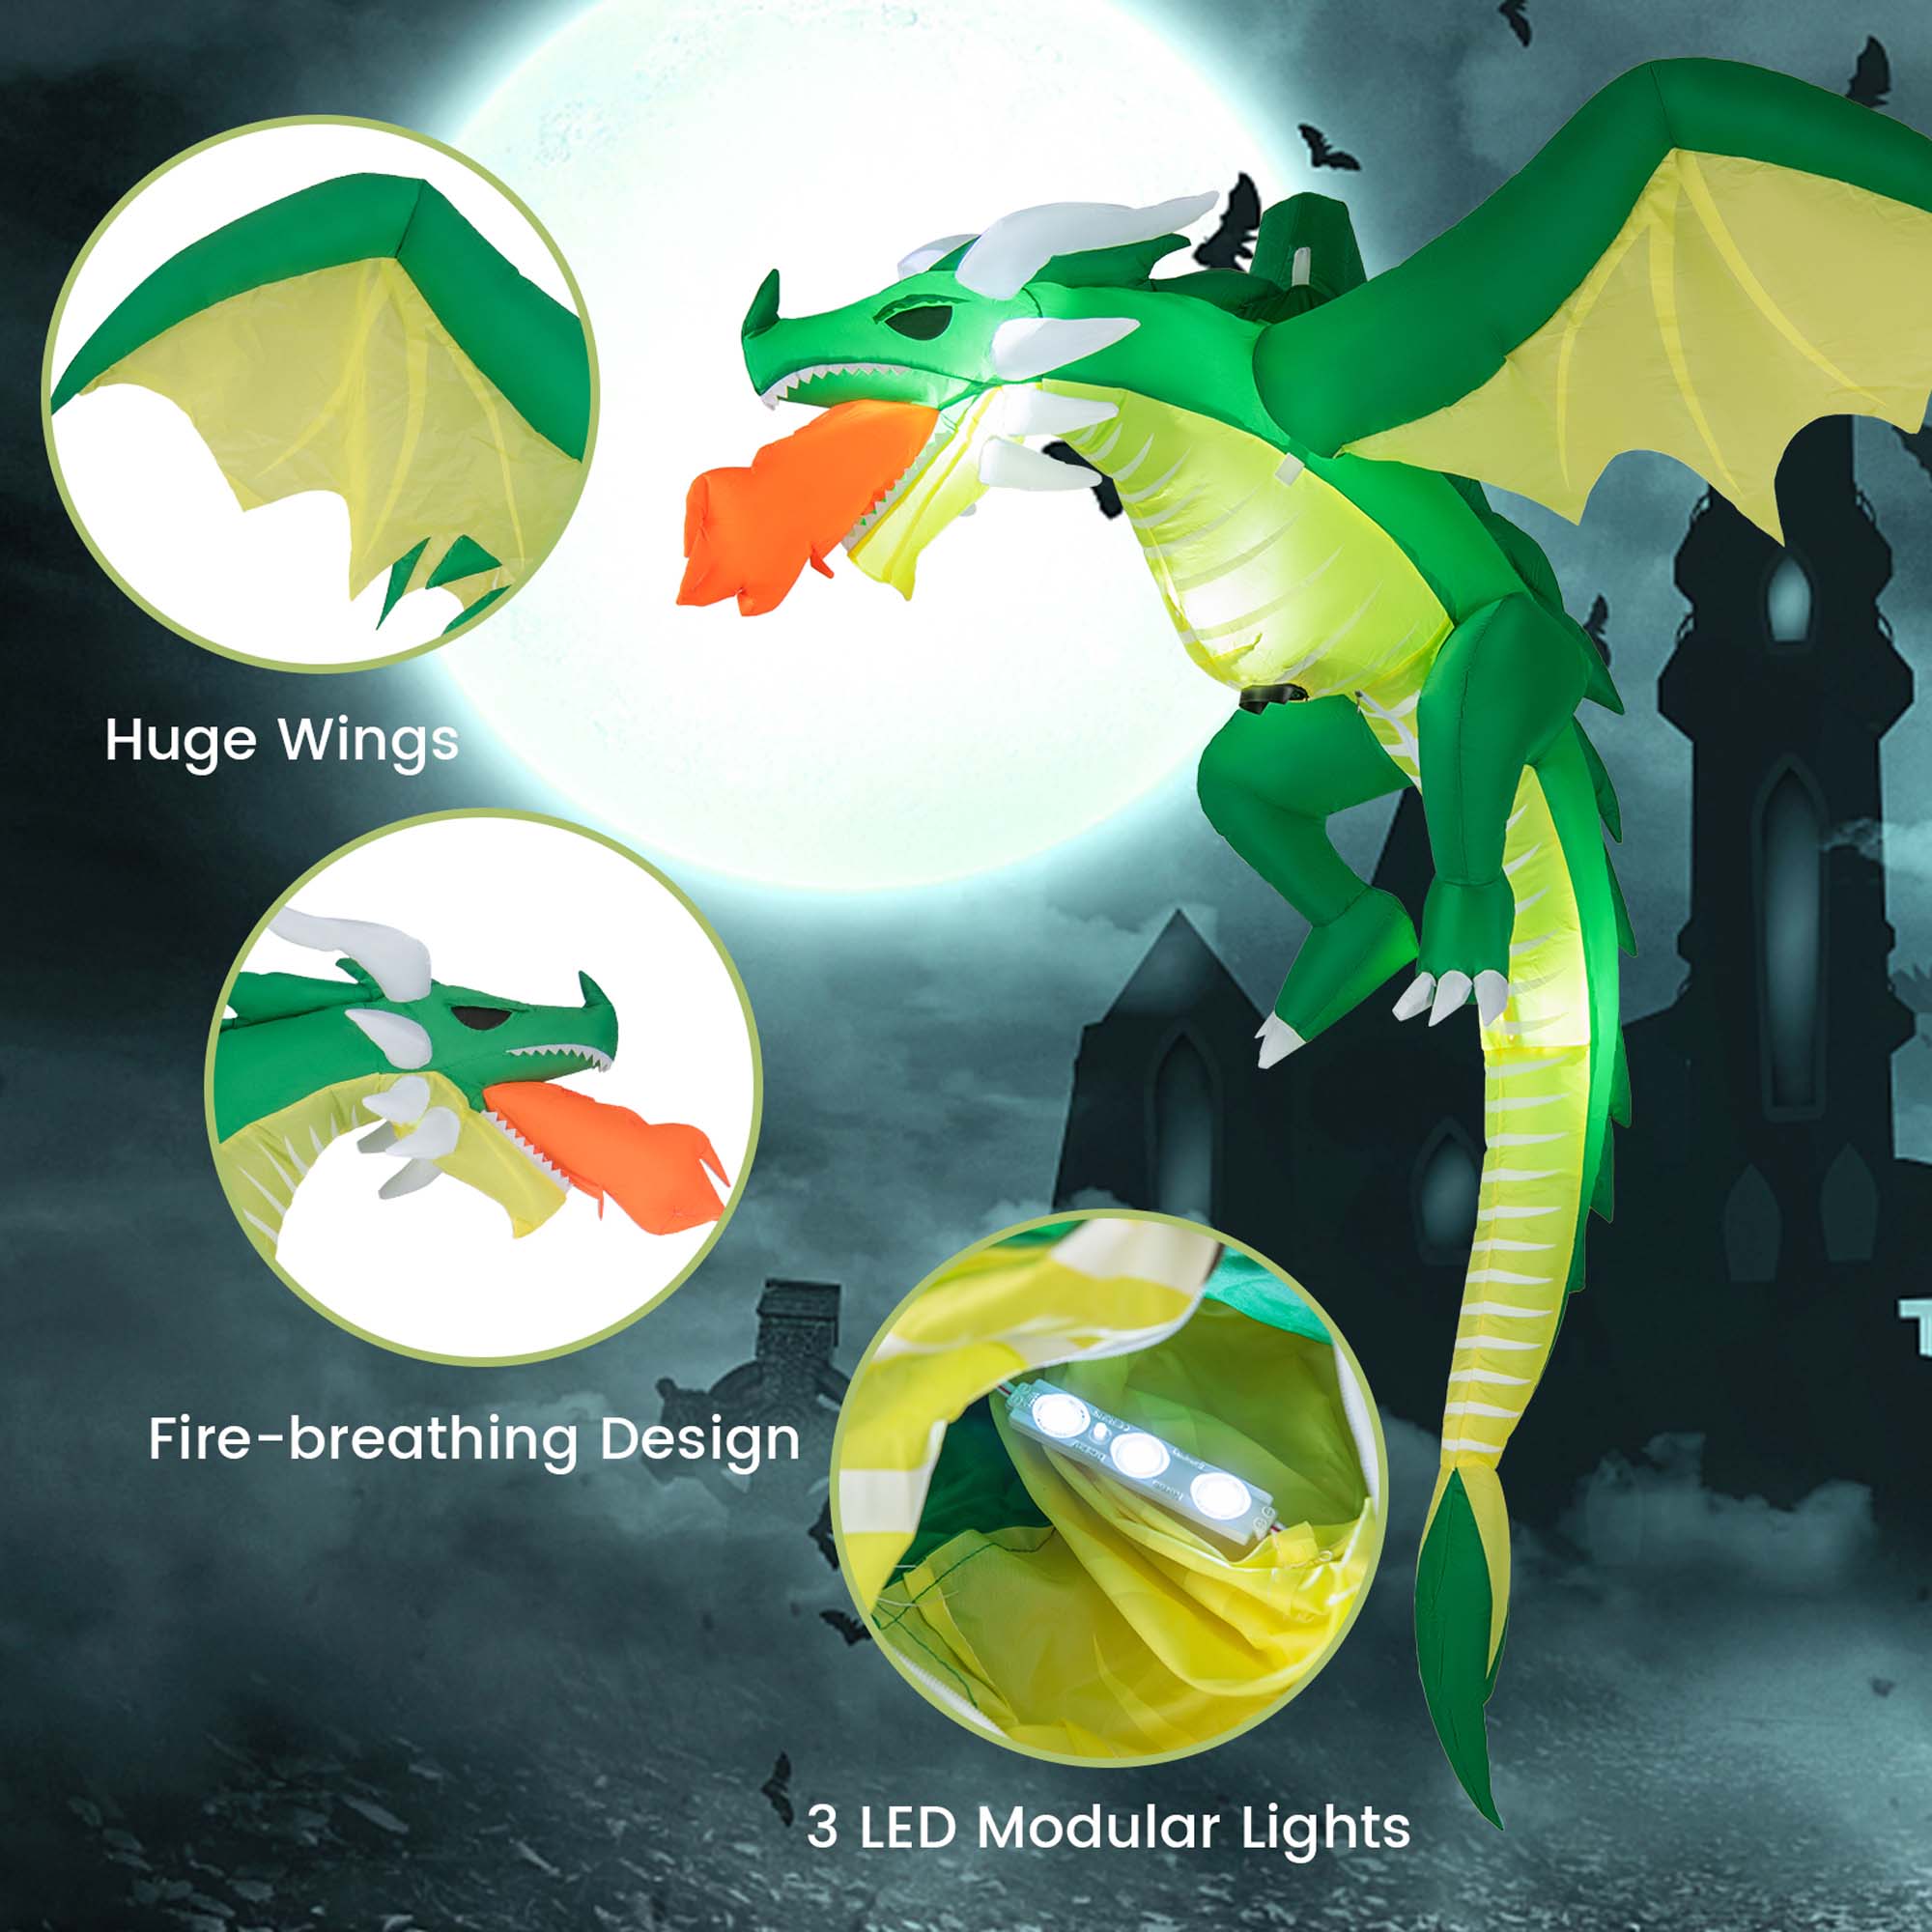 Costway 5 FT Hanging Halloween Inflatable Fire-breathing Dragon Flying Decoration Yard